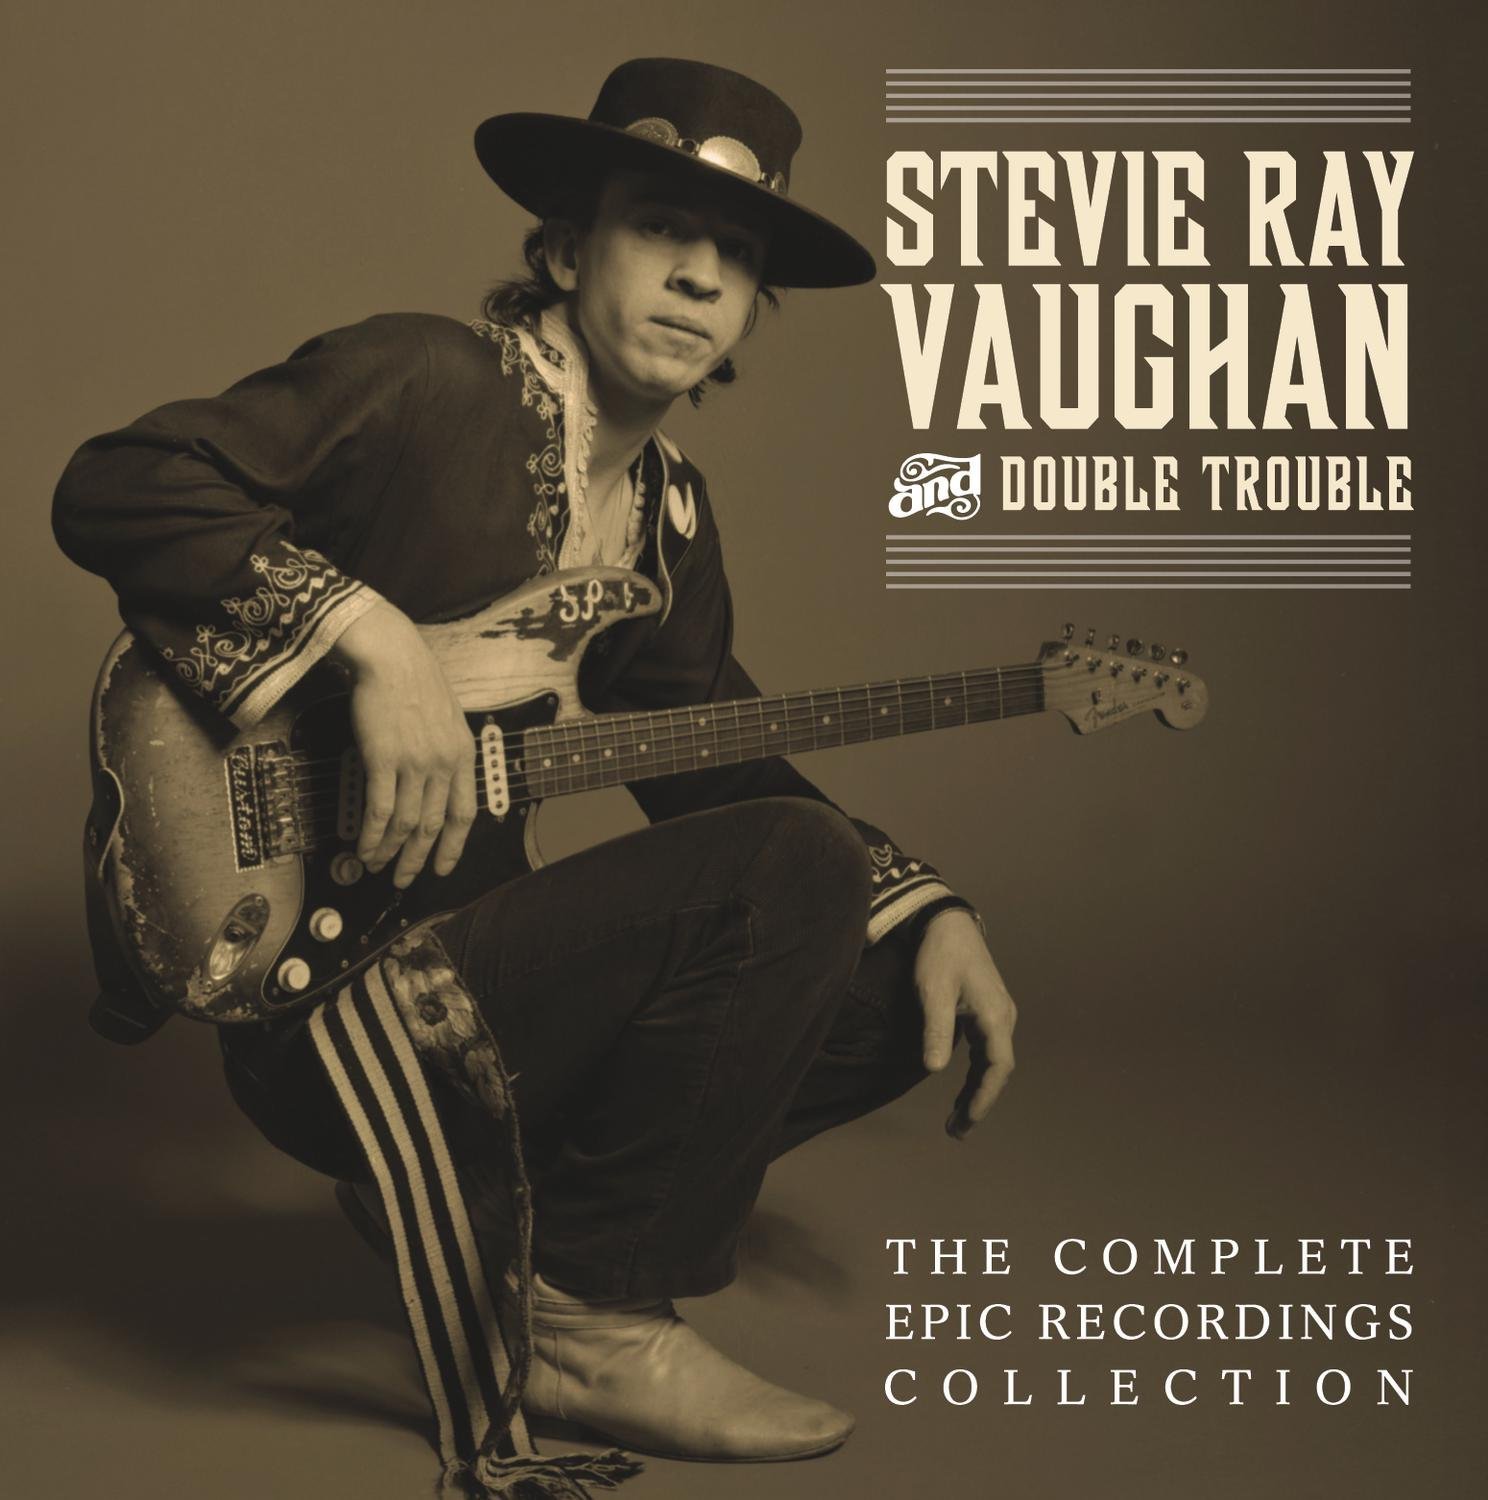 Stevie Ray Vaughan & Double Trouble – The Complete Epic Recordings 